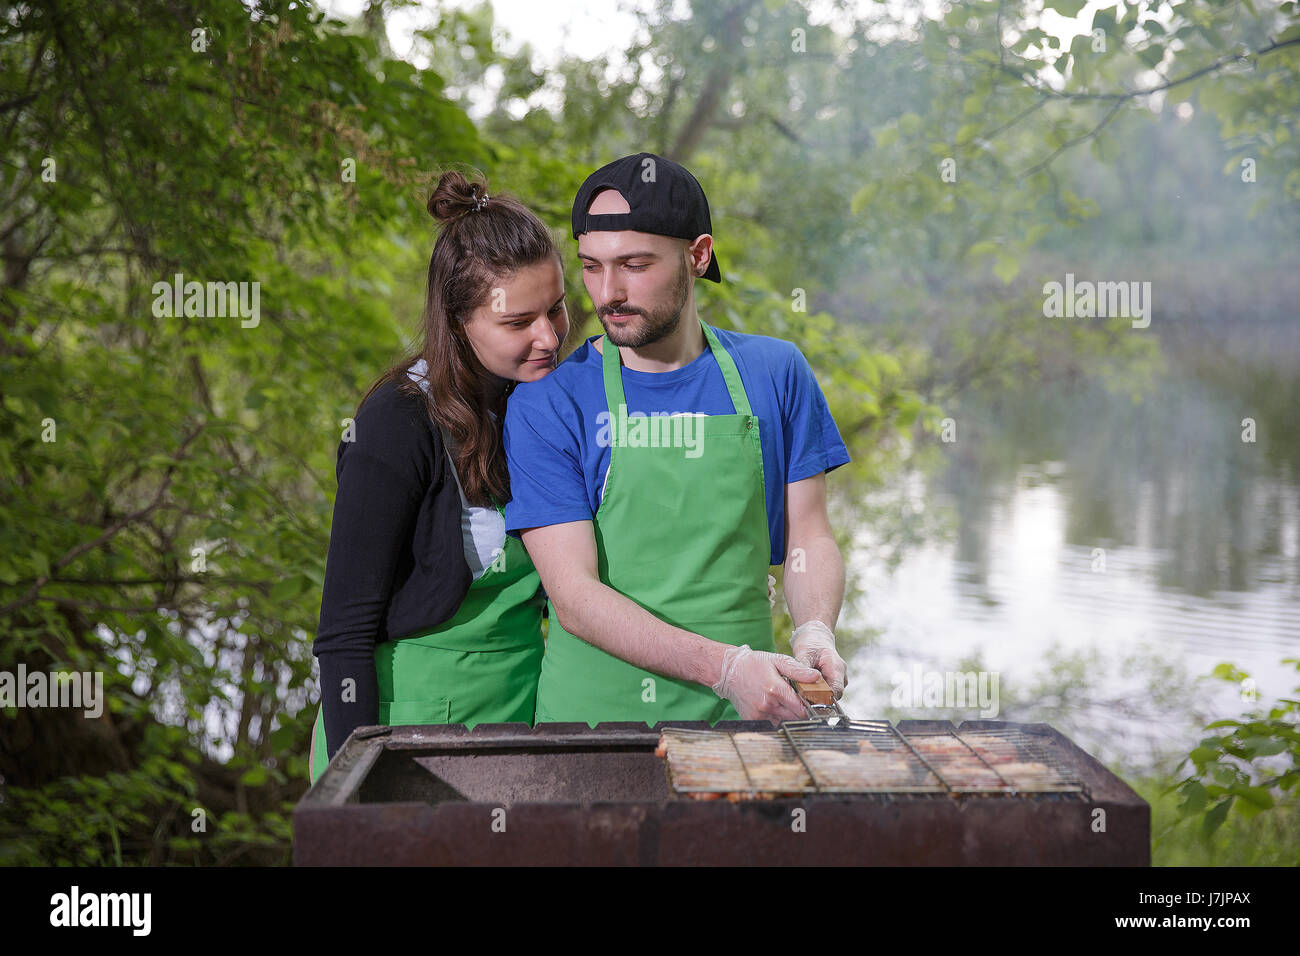 Young couple preparing meat on a grill outdoors Stock Photo